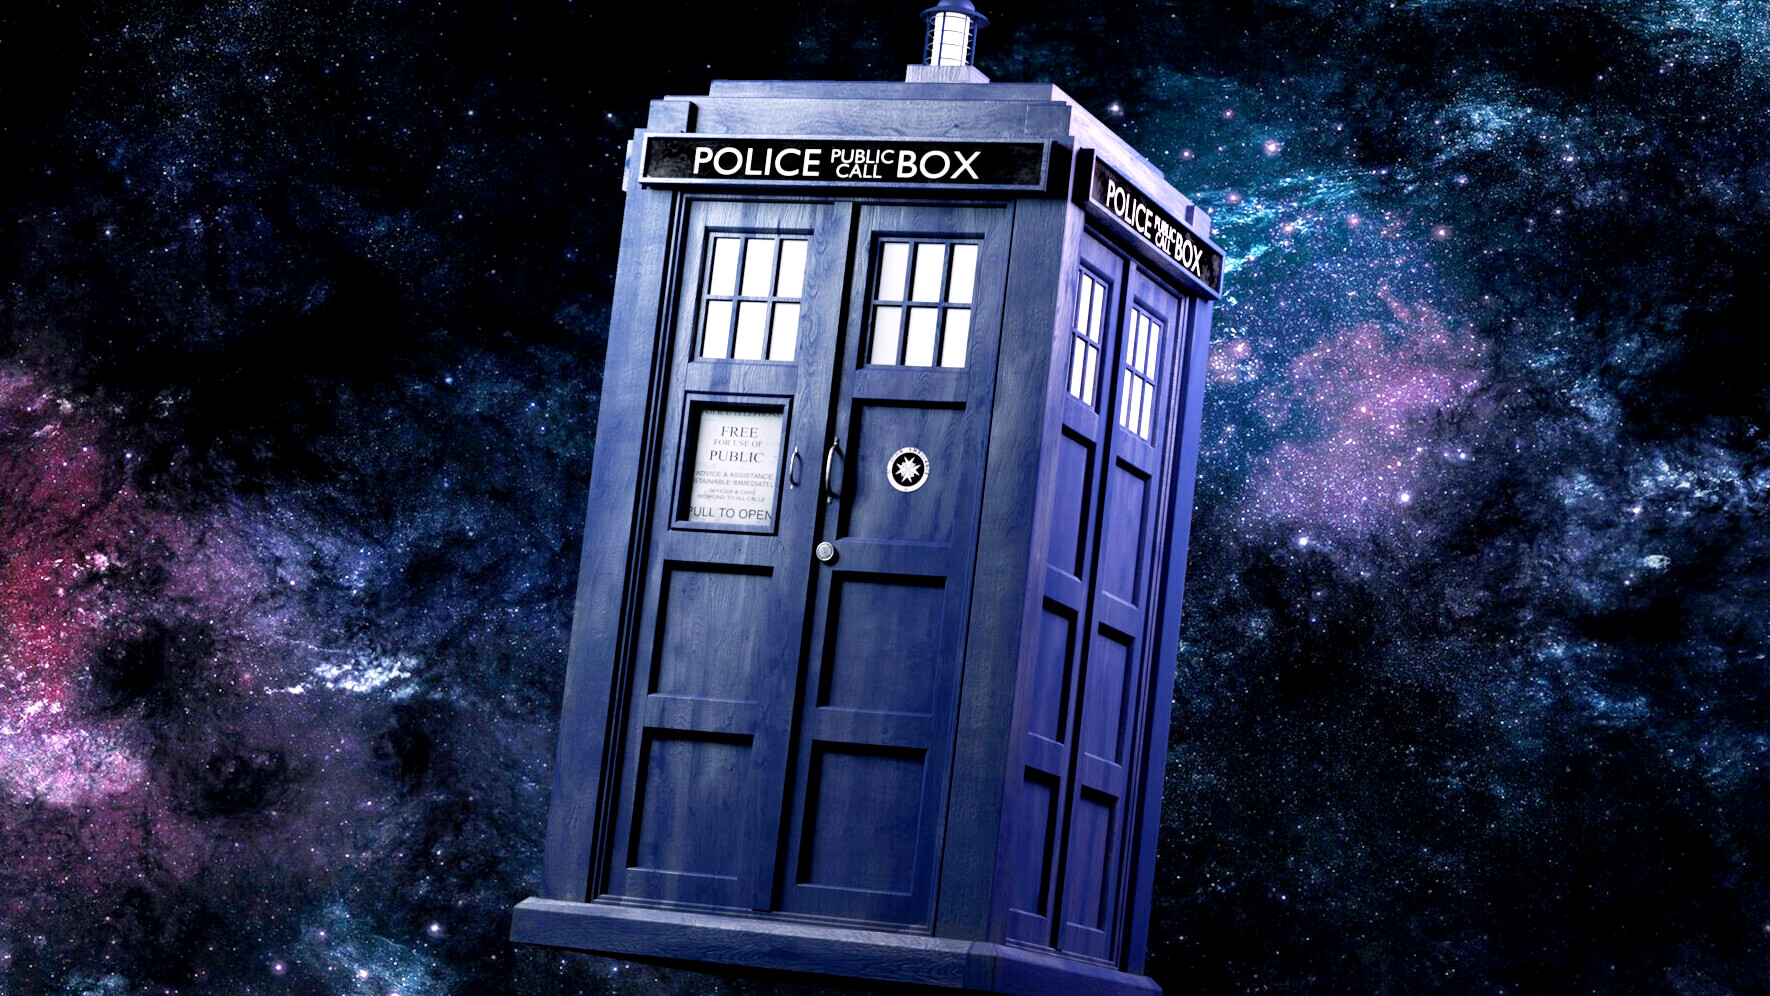 Doctor Who Display – Saint Louis Science Center